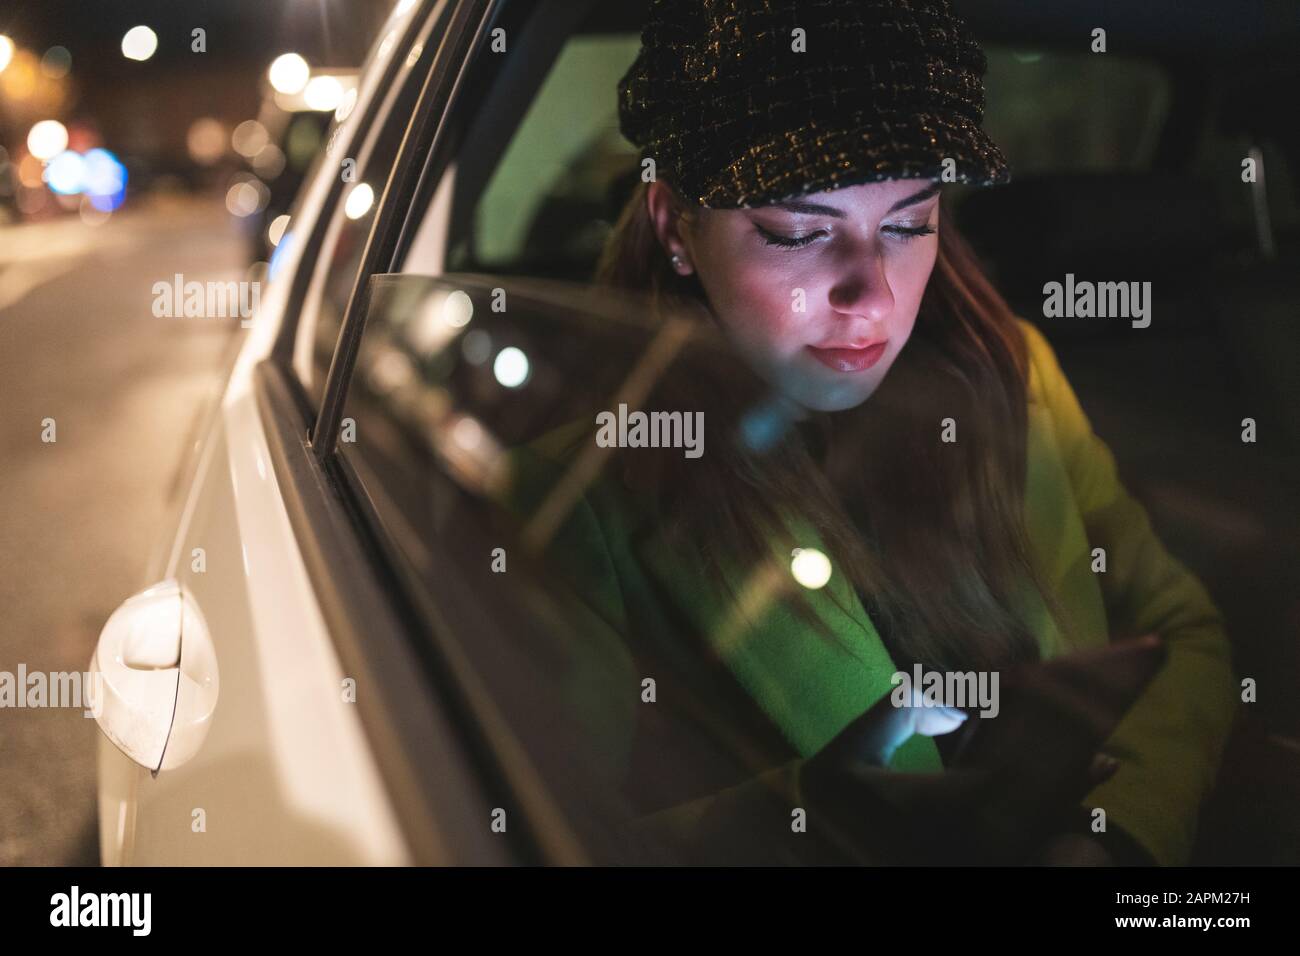 Woman sitting on the backseat of a car in the city at night Stock Photo